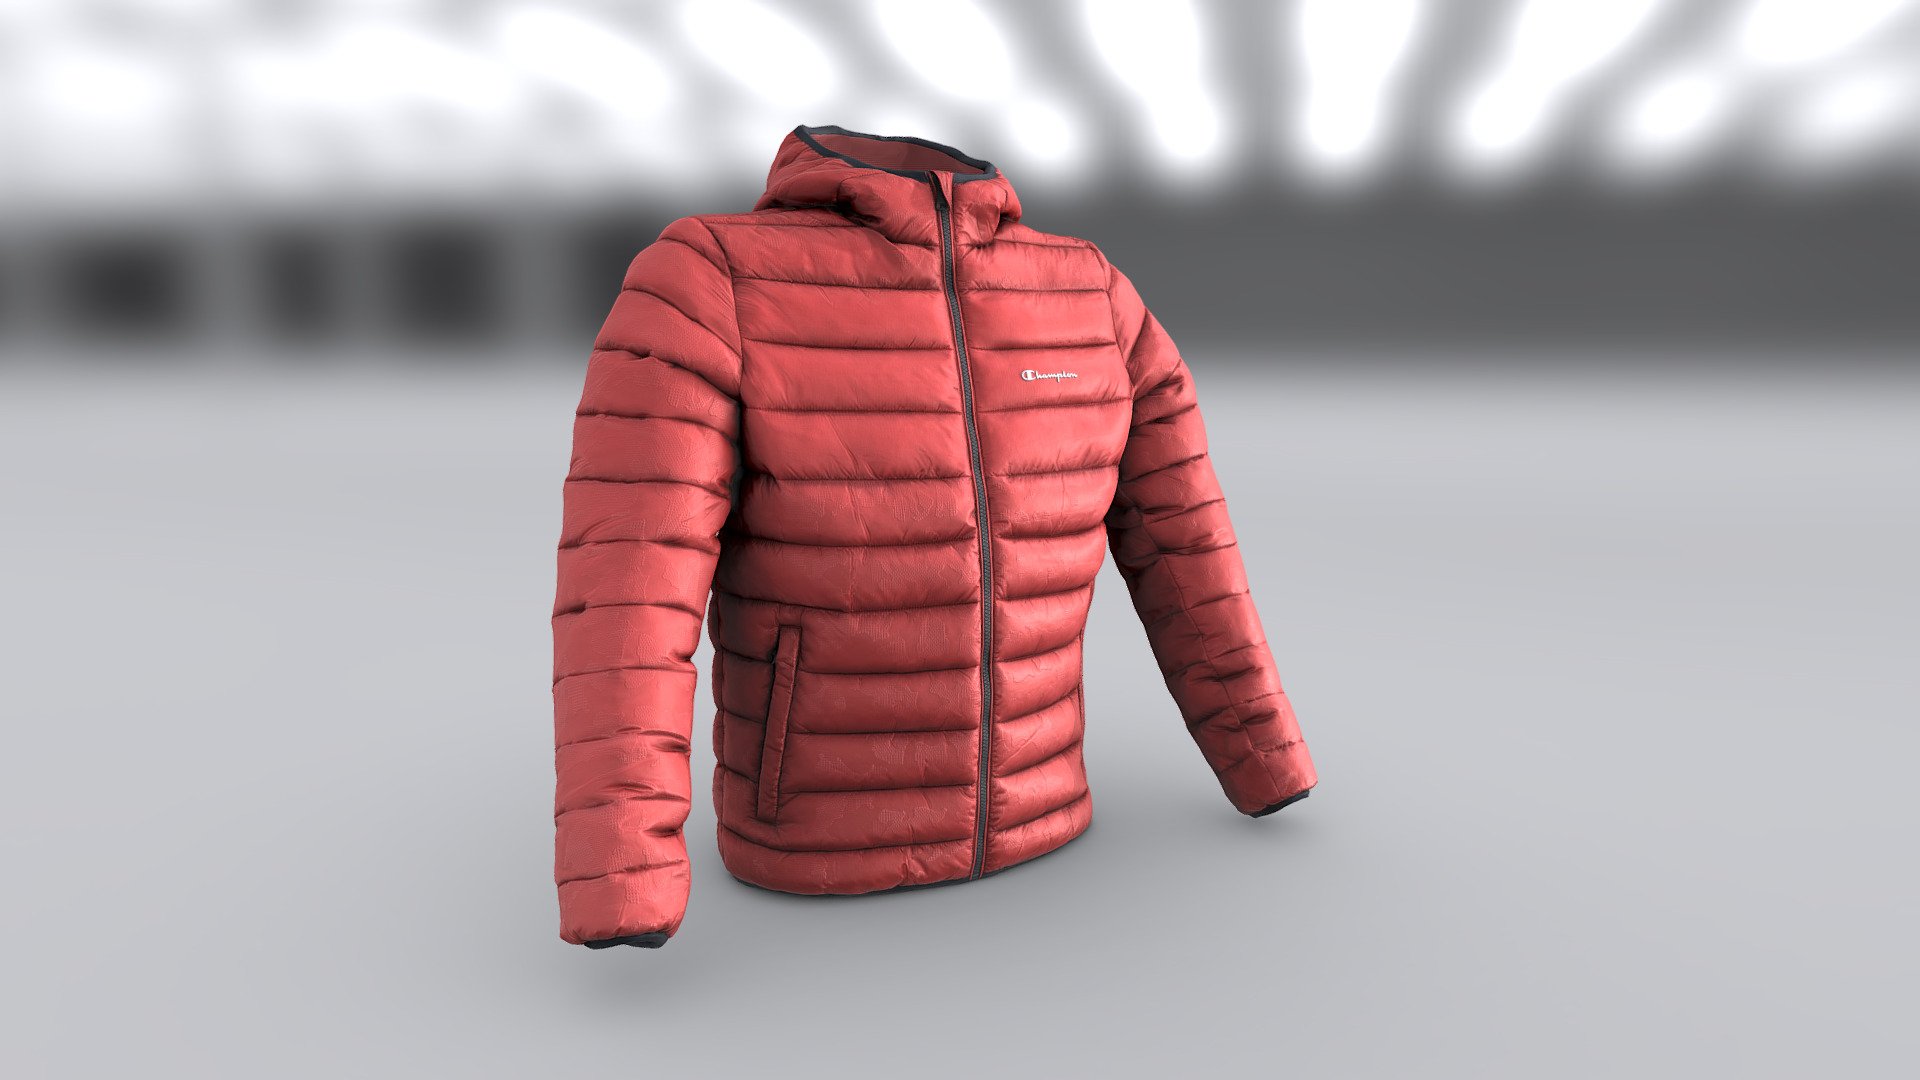 Realistic jacket model with high resolution textures. Model created by our unique semi-automatic scanning technology

Optimized for 3D web and AR / VR

=======FEATURES===========


The units of measurement during the creation process were milimeters.
Clean and optimized topology is used for maximum polygon efficiency.
This model consists of one mesh.
All objects have fully unwrapped UVs.
The model has one material

Includes 4096x4096 .jpg textures (diffuse (base color), Roughness). 70k polygons

================== - Champion Legacy jacket - Buy Royalty Free 3D model by VRModelFactory 3d model